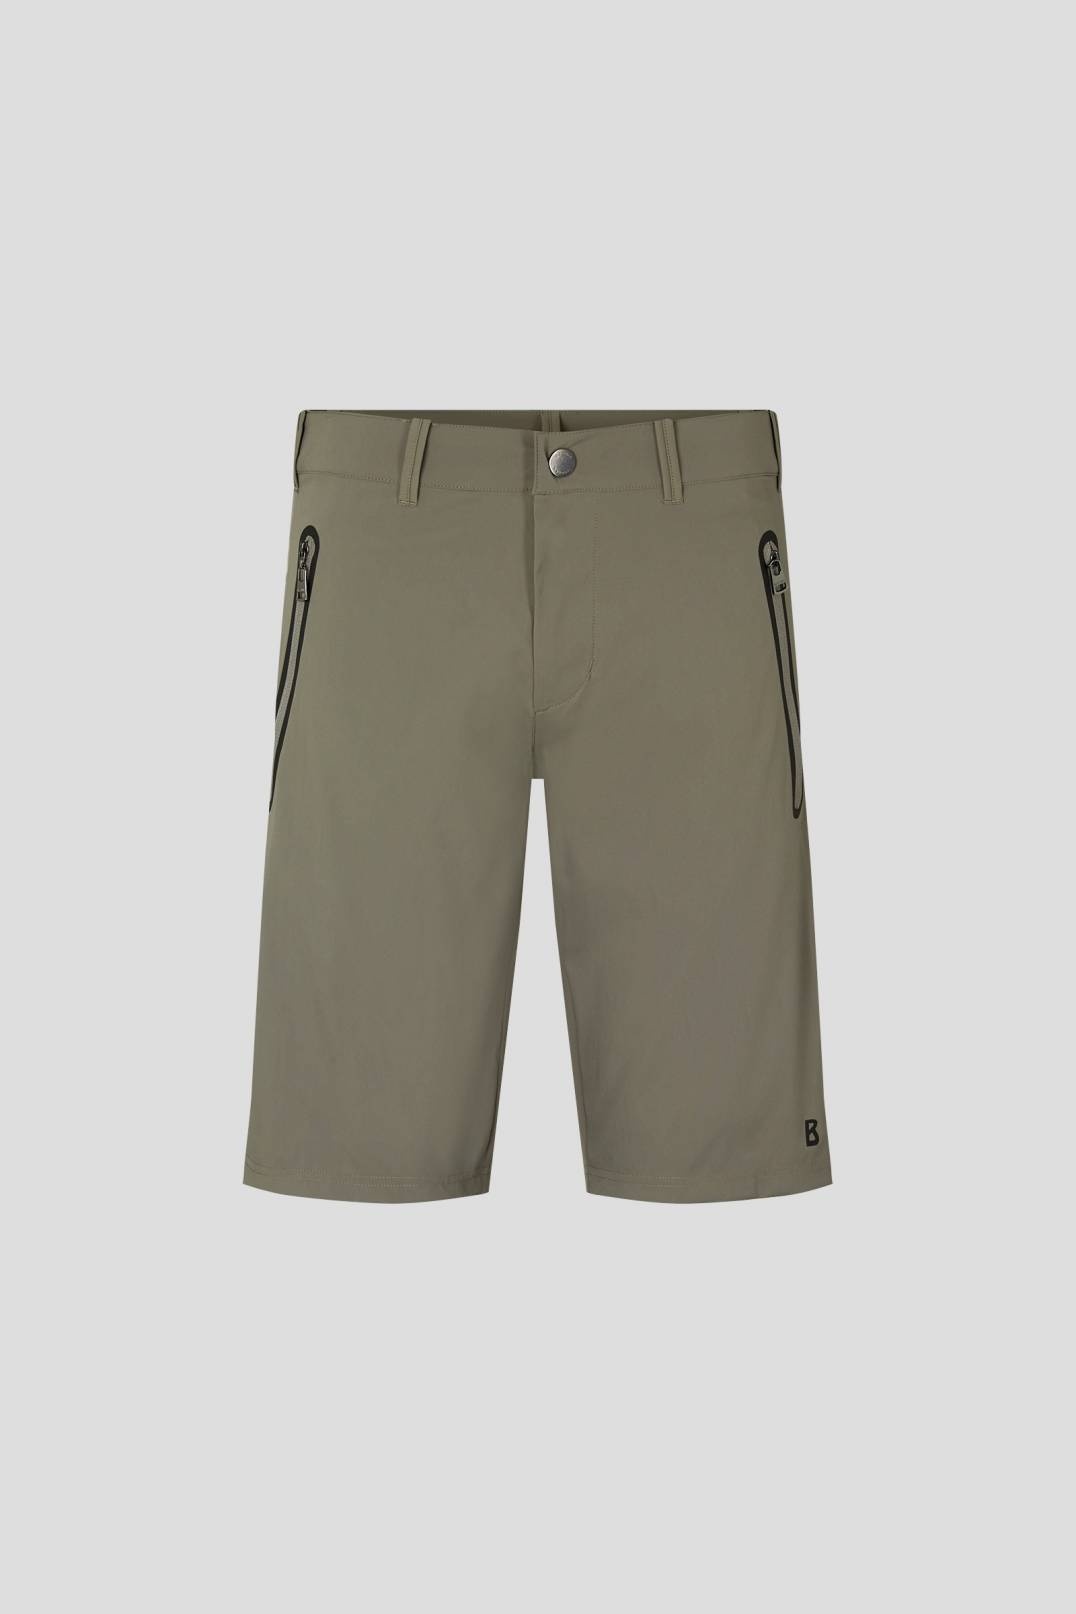 COLVIN FUNCTIONAL SHORTS IN OLIVE GREEN - 1